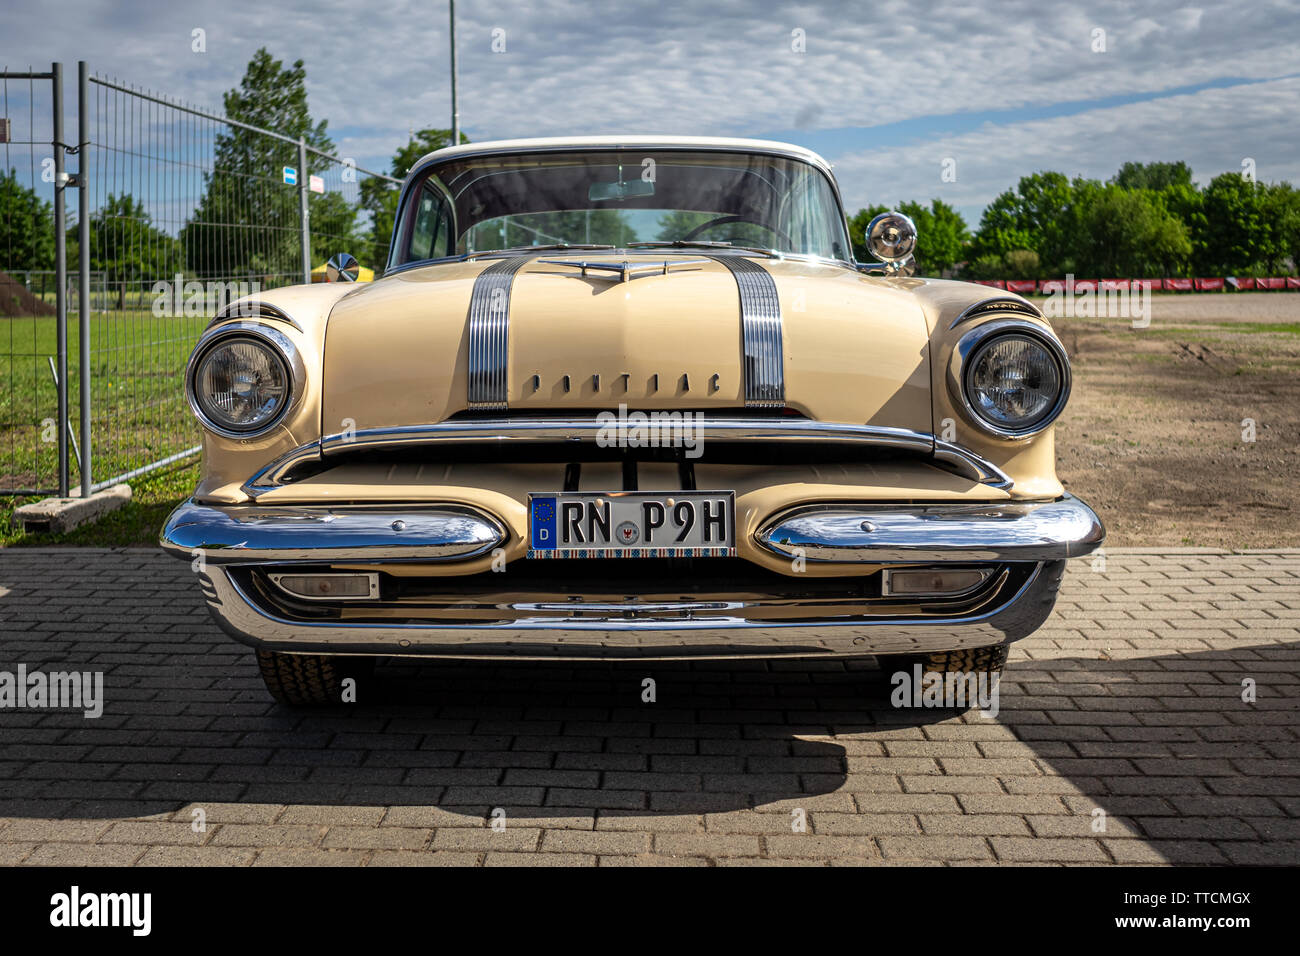 PAAREN IM GLIEN, GERMANY - JUNE 08, 2019: Full-size car Pontiac Star Chief Catalina Coupe, 1958. Die Oldtimer Show 2019. Stock Photo